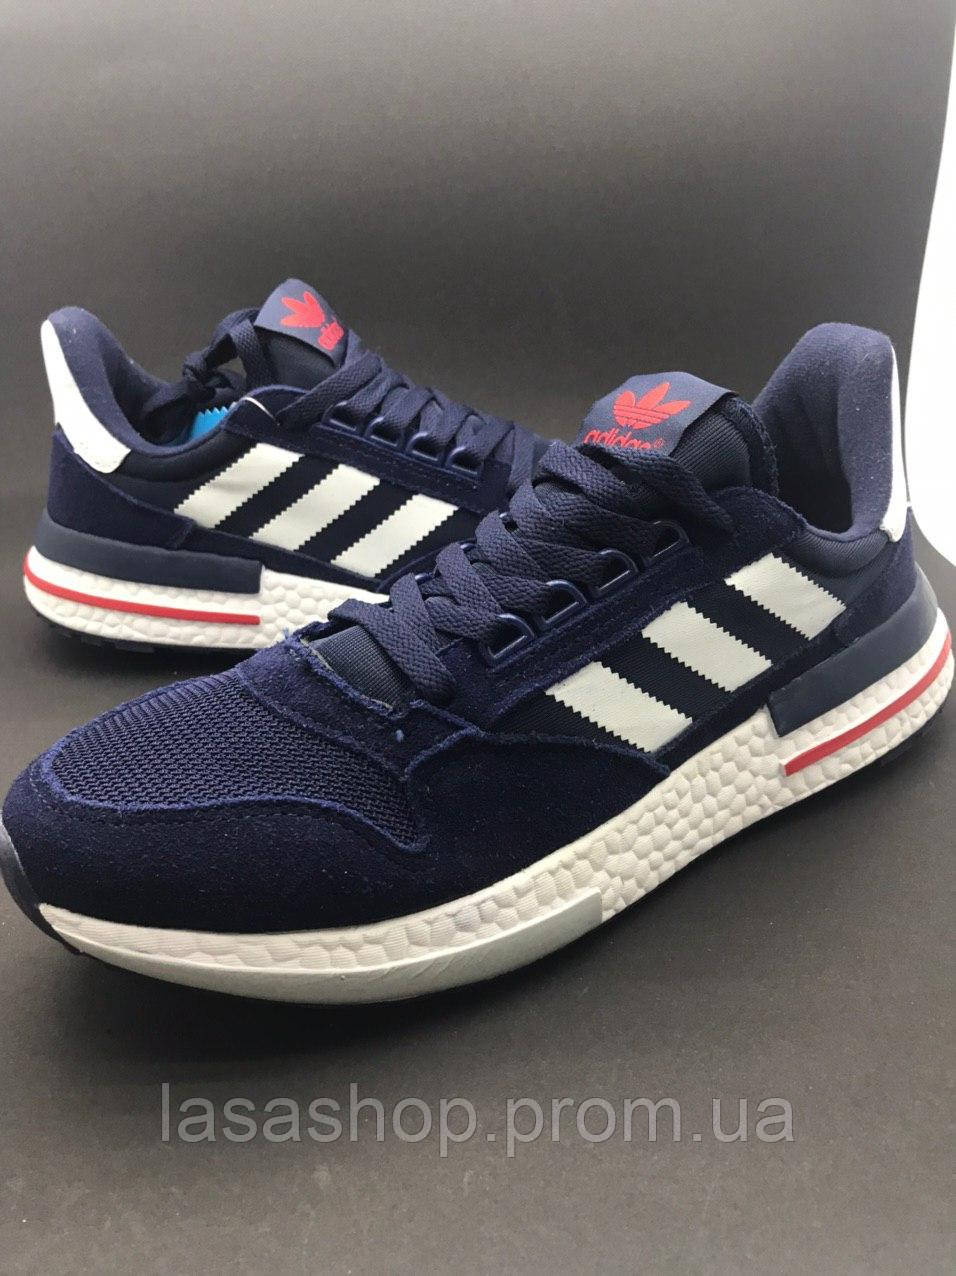 zx 500 rm boost